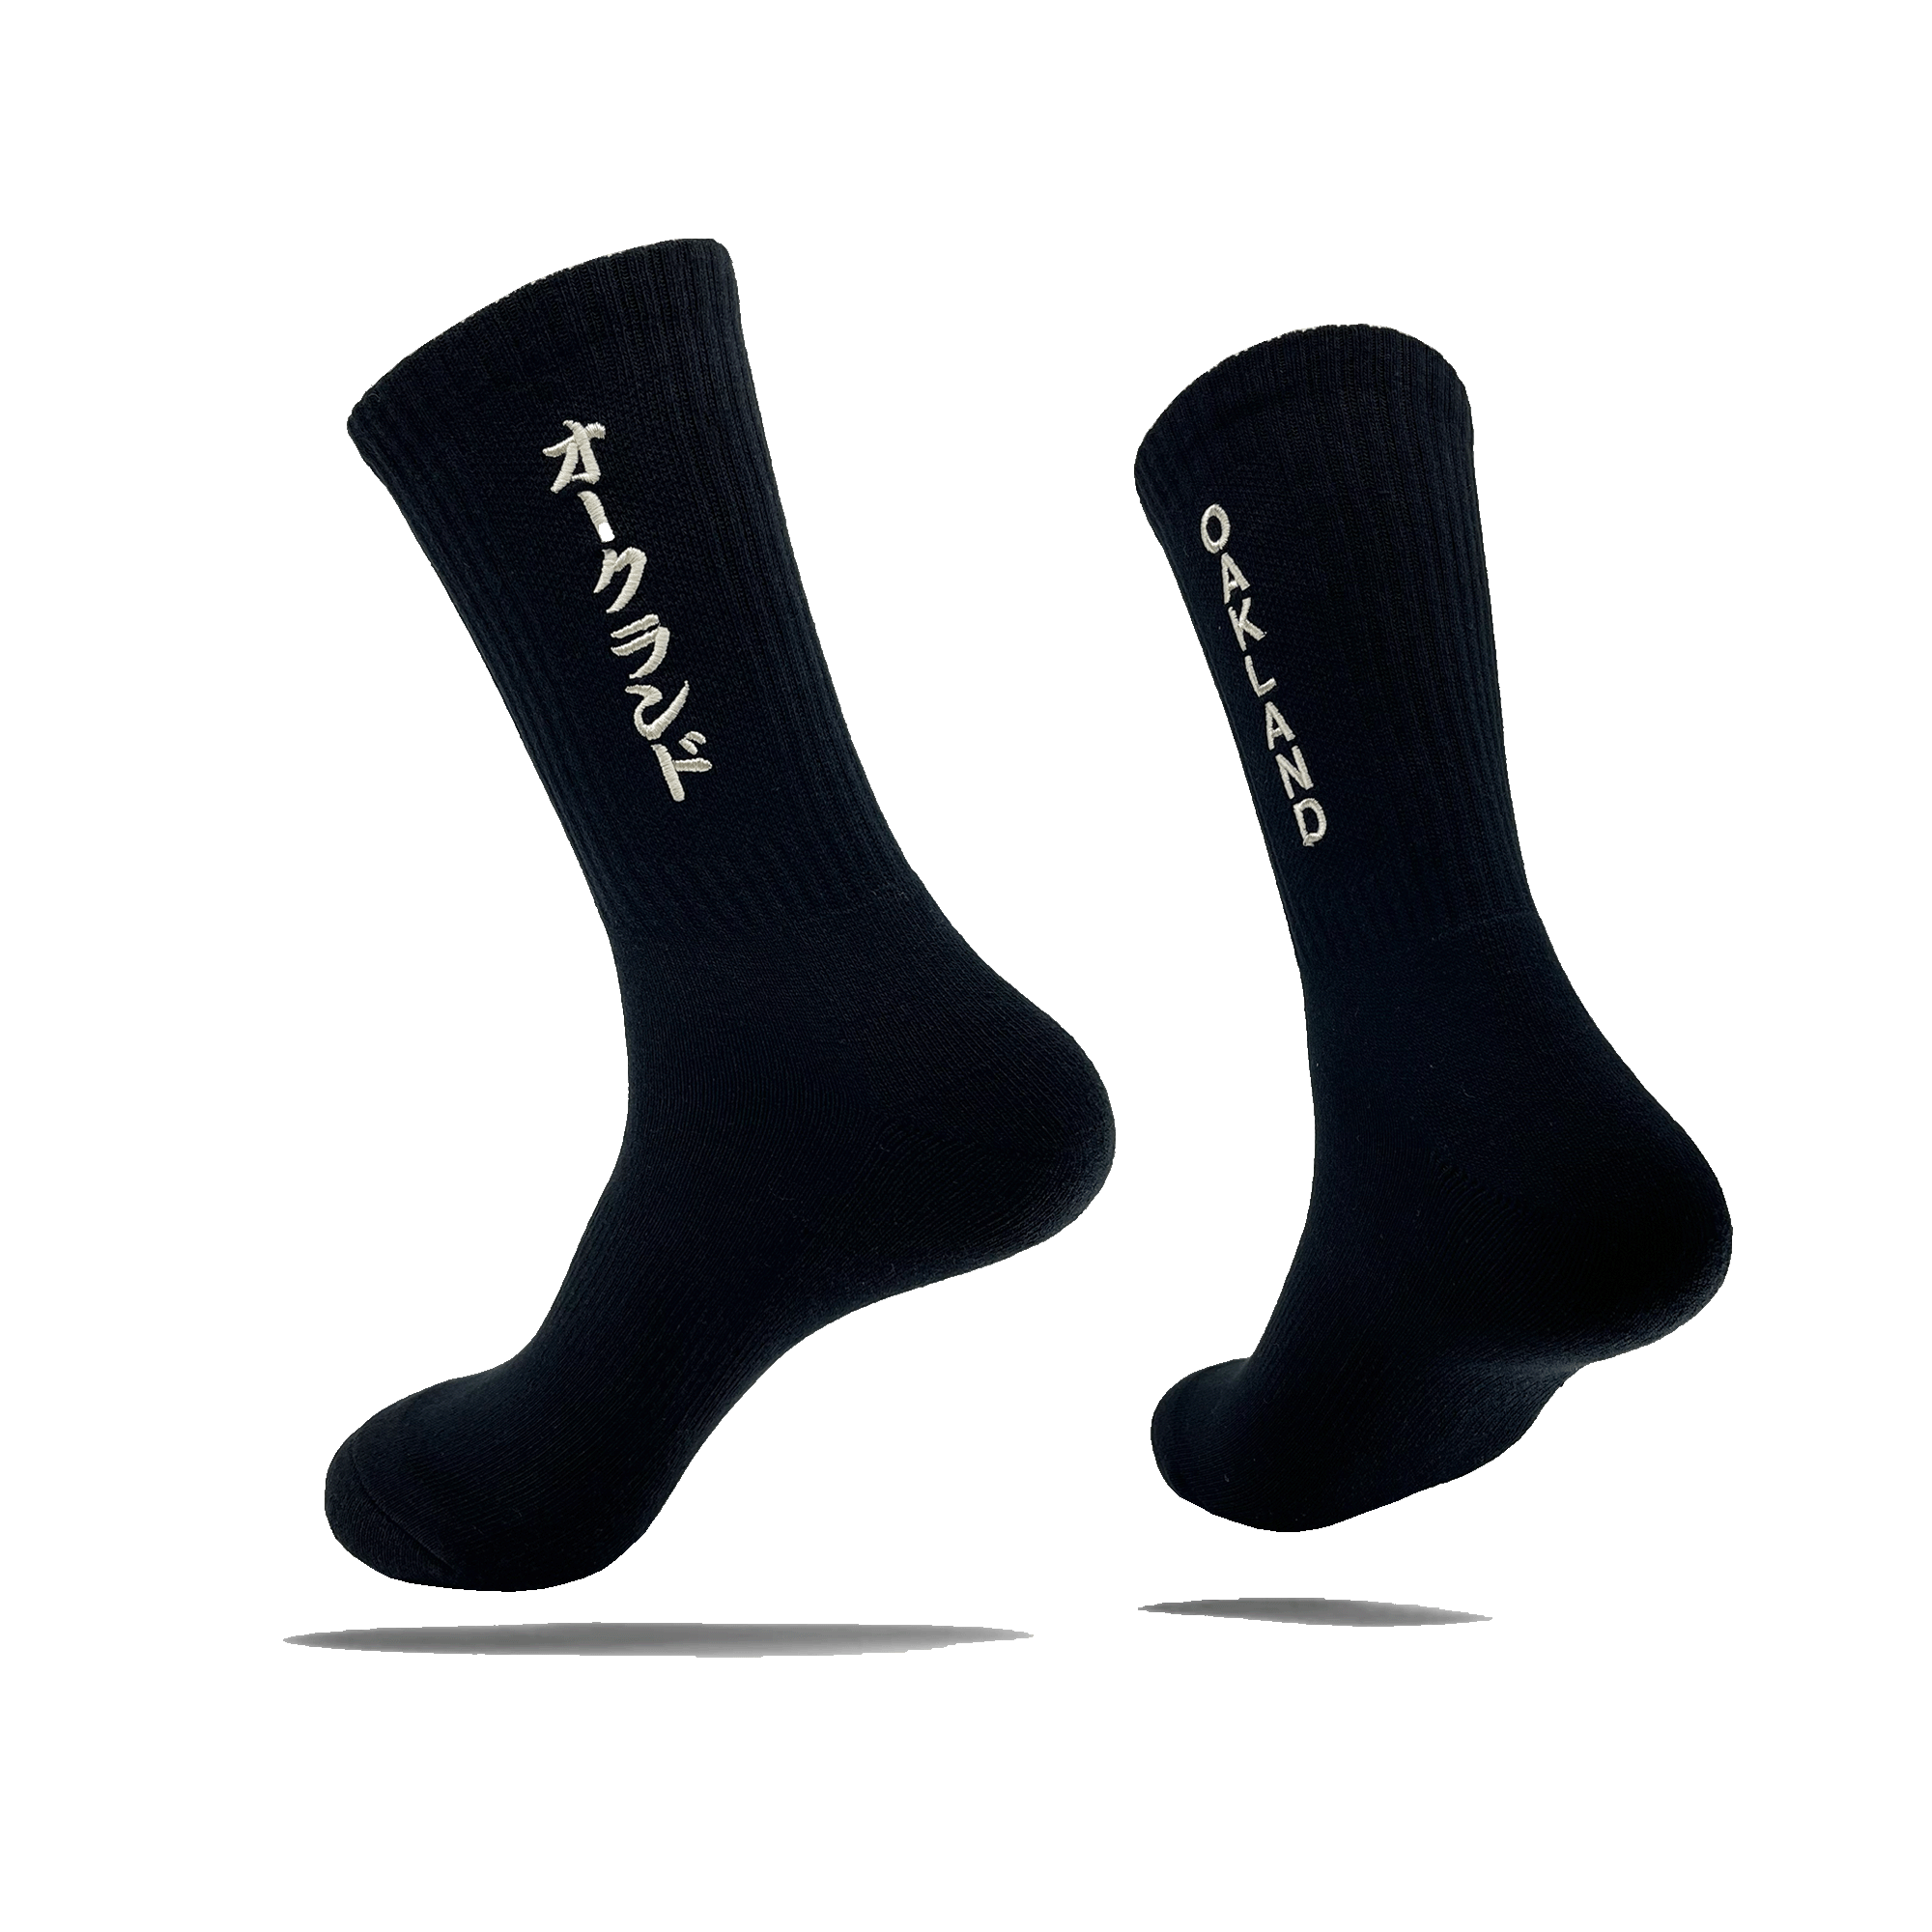 Side view of a pair of black crew socks with OAKLAND wordmark on the side of one sock and Kanji Japanese writing on the other.